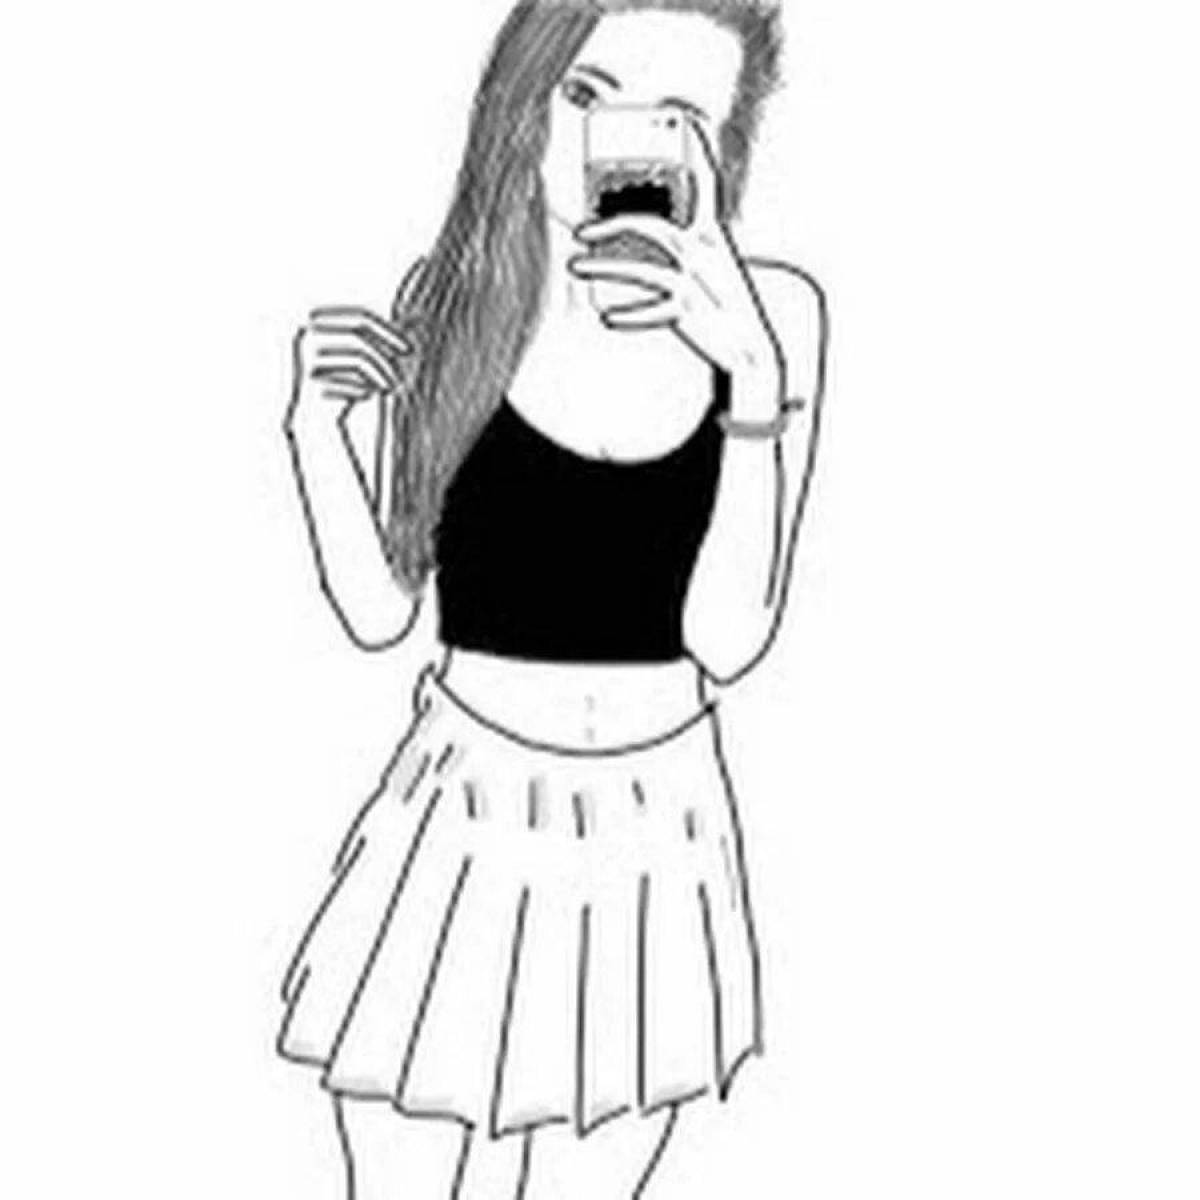 A fascinating coloring book of a girl with iPhones